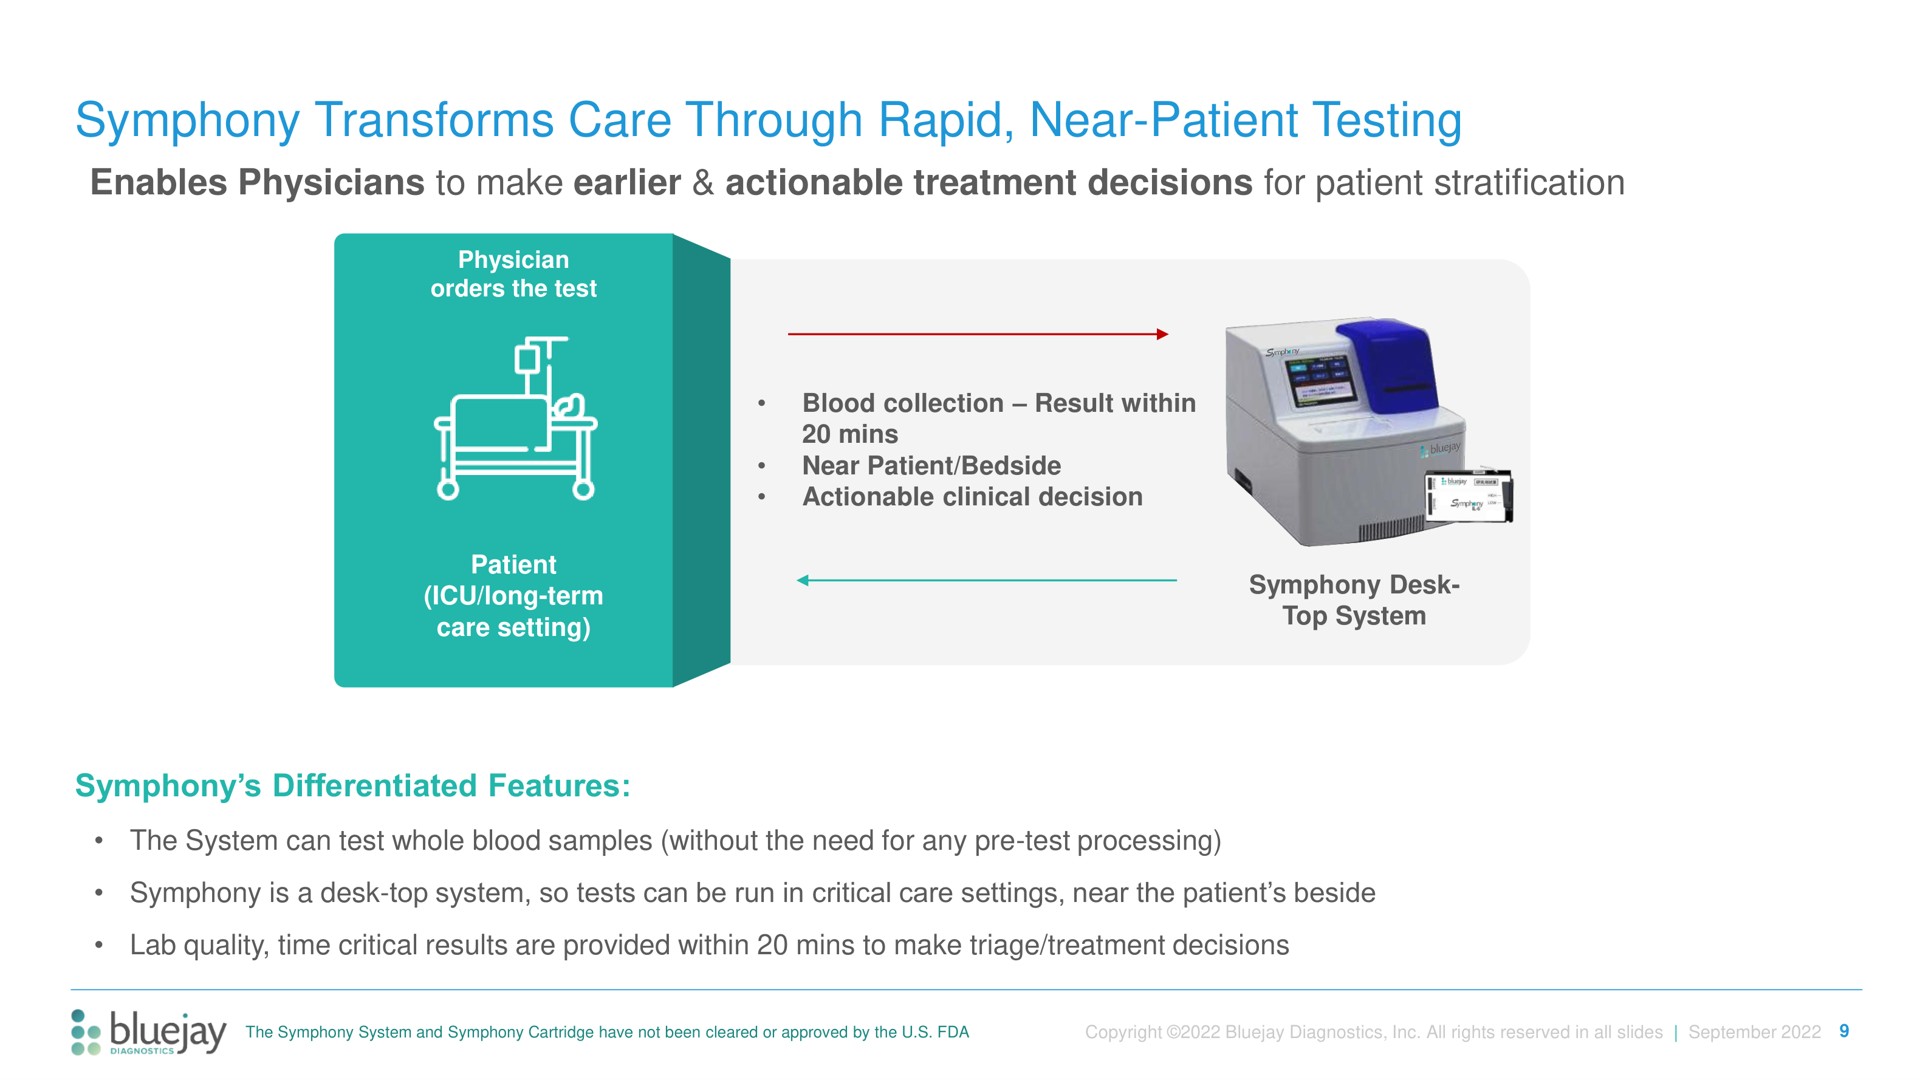 symphony transforms care through rapid near patient testing enables physicians to make actionable treatment decisions for patient stratification | Bluejay